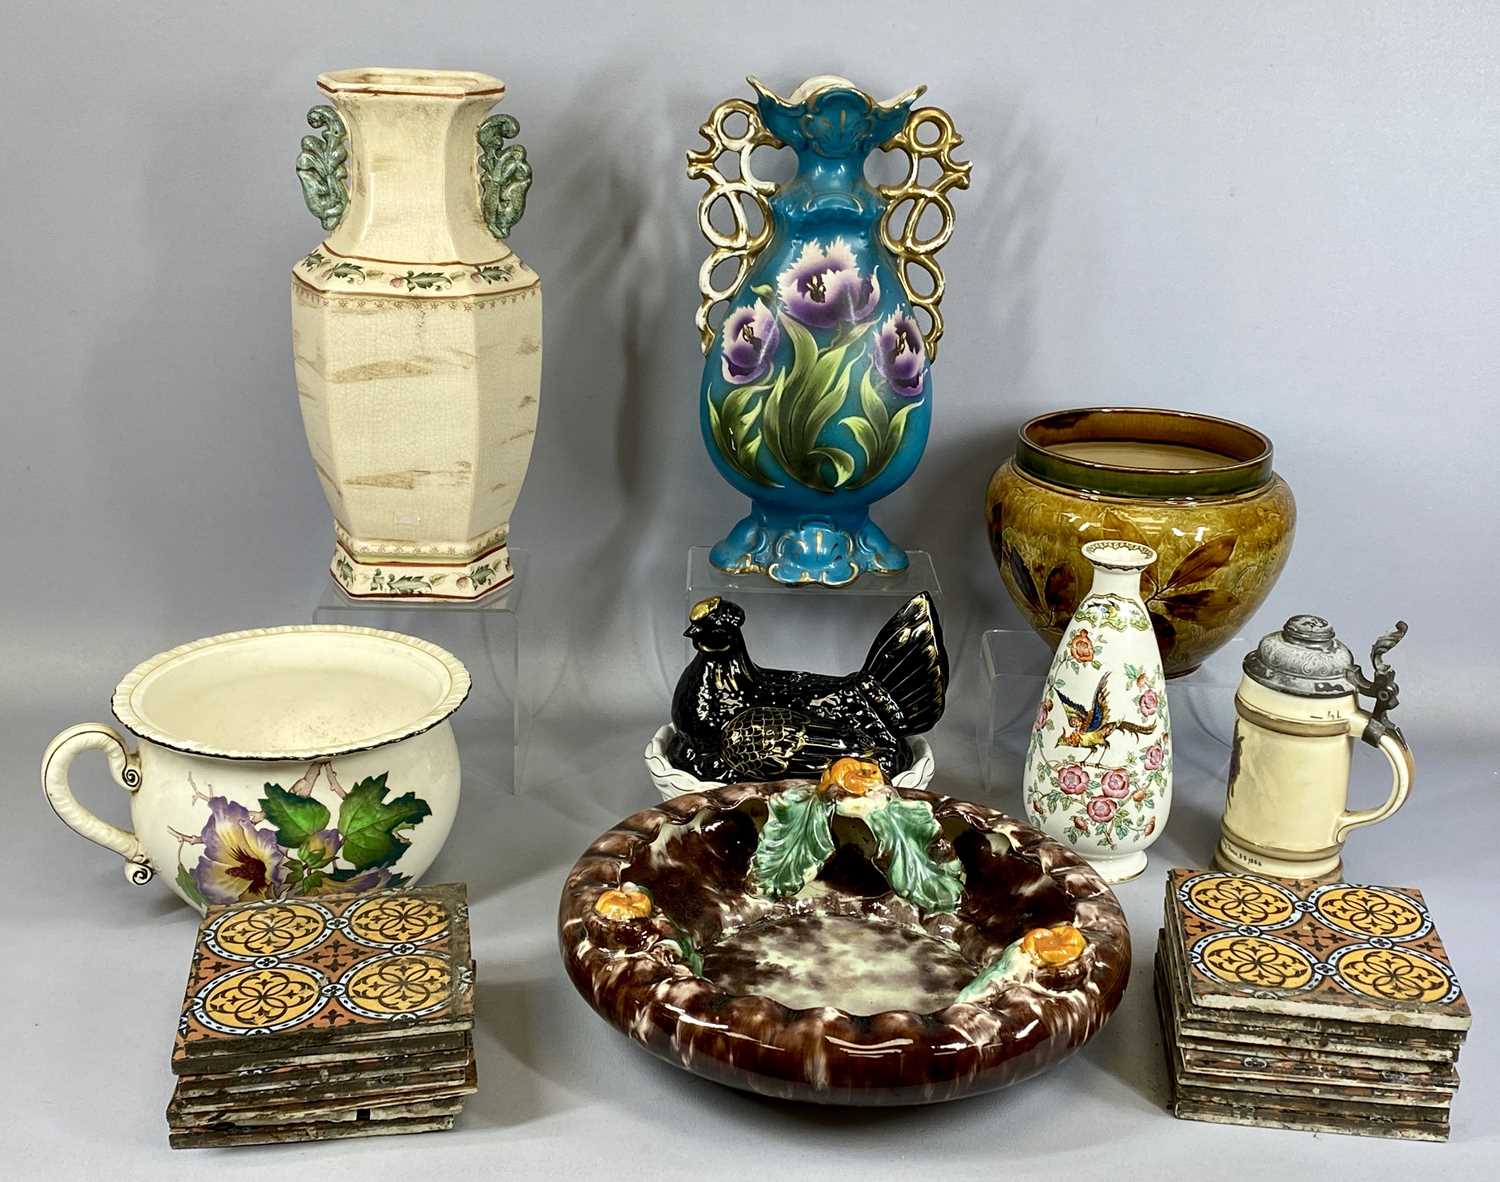 GROUP OF MIXED CERAMICS, late 19th century and later, including Royal Doulton stoneware